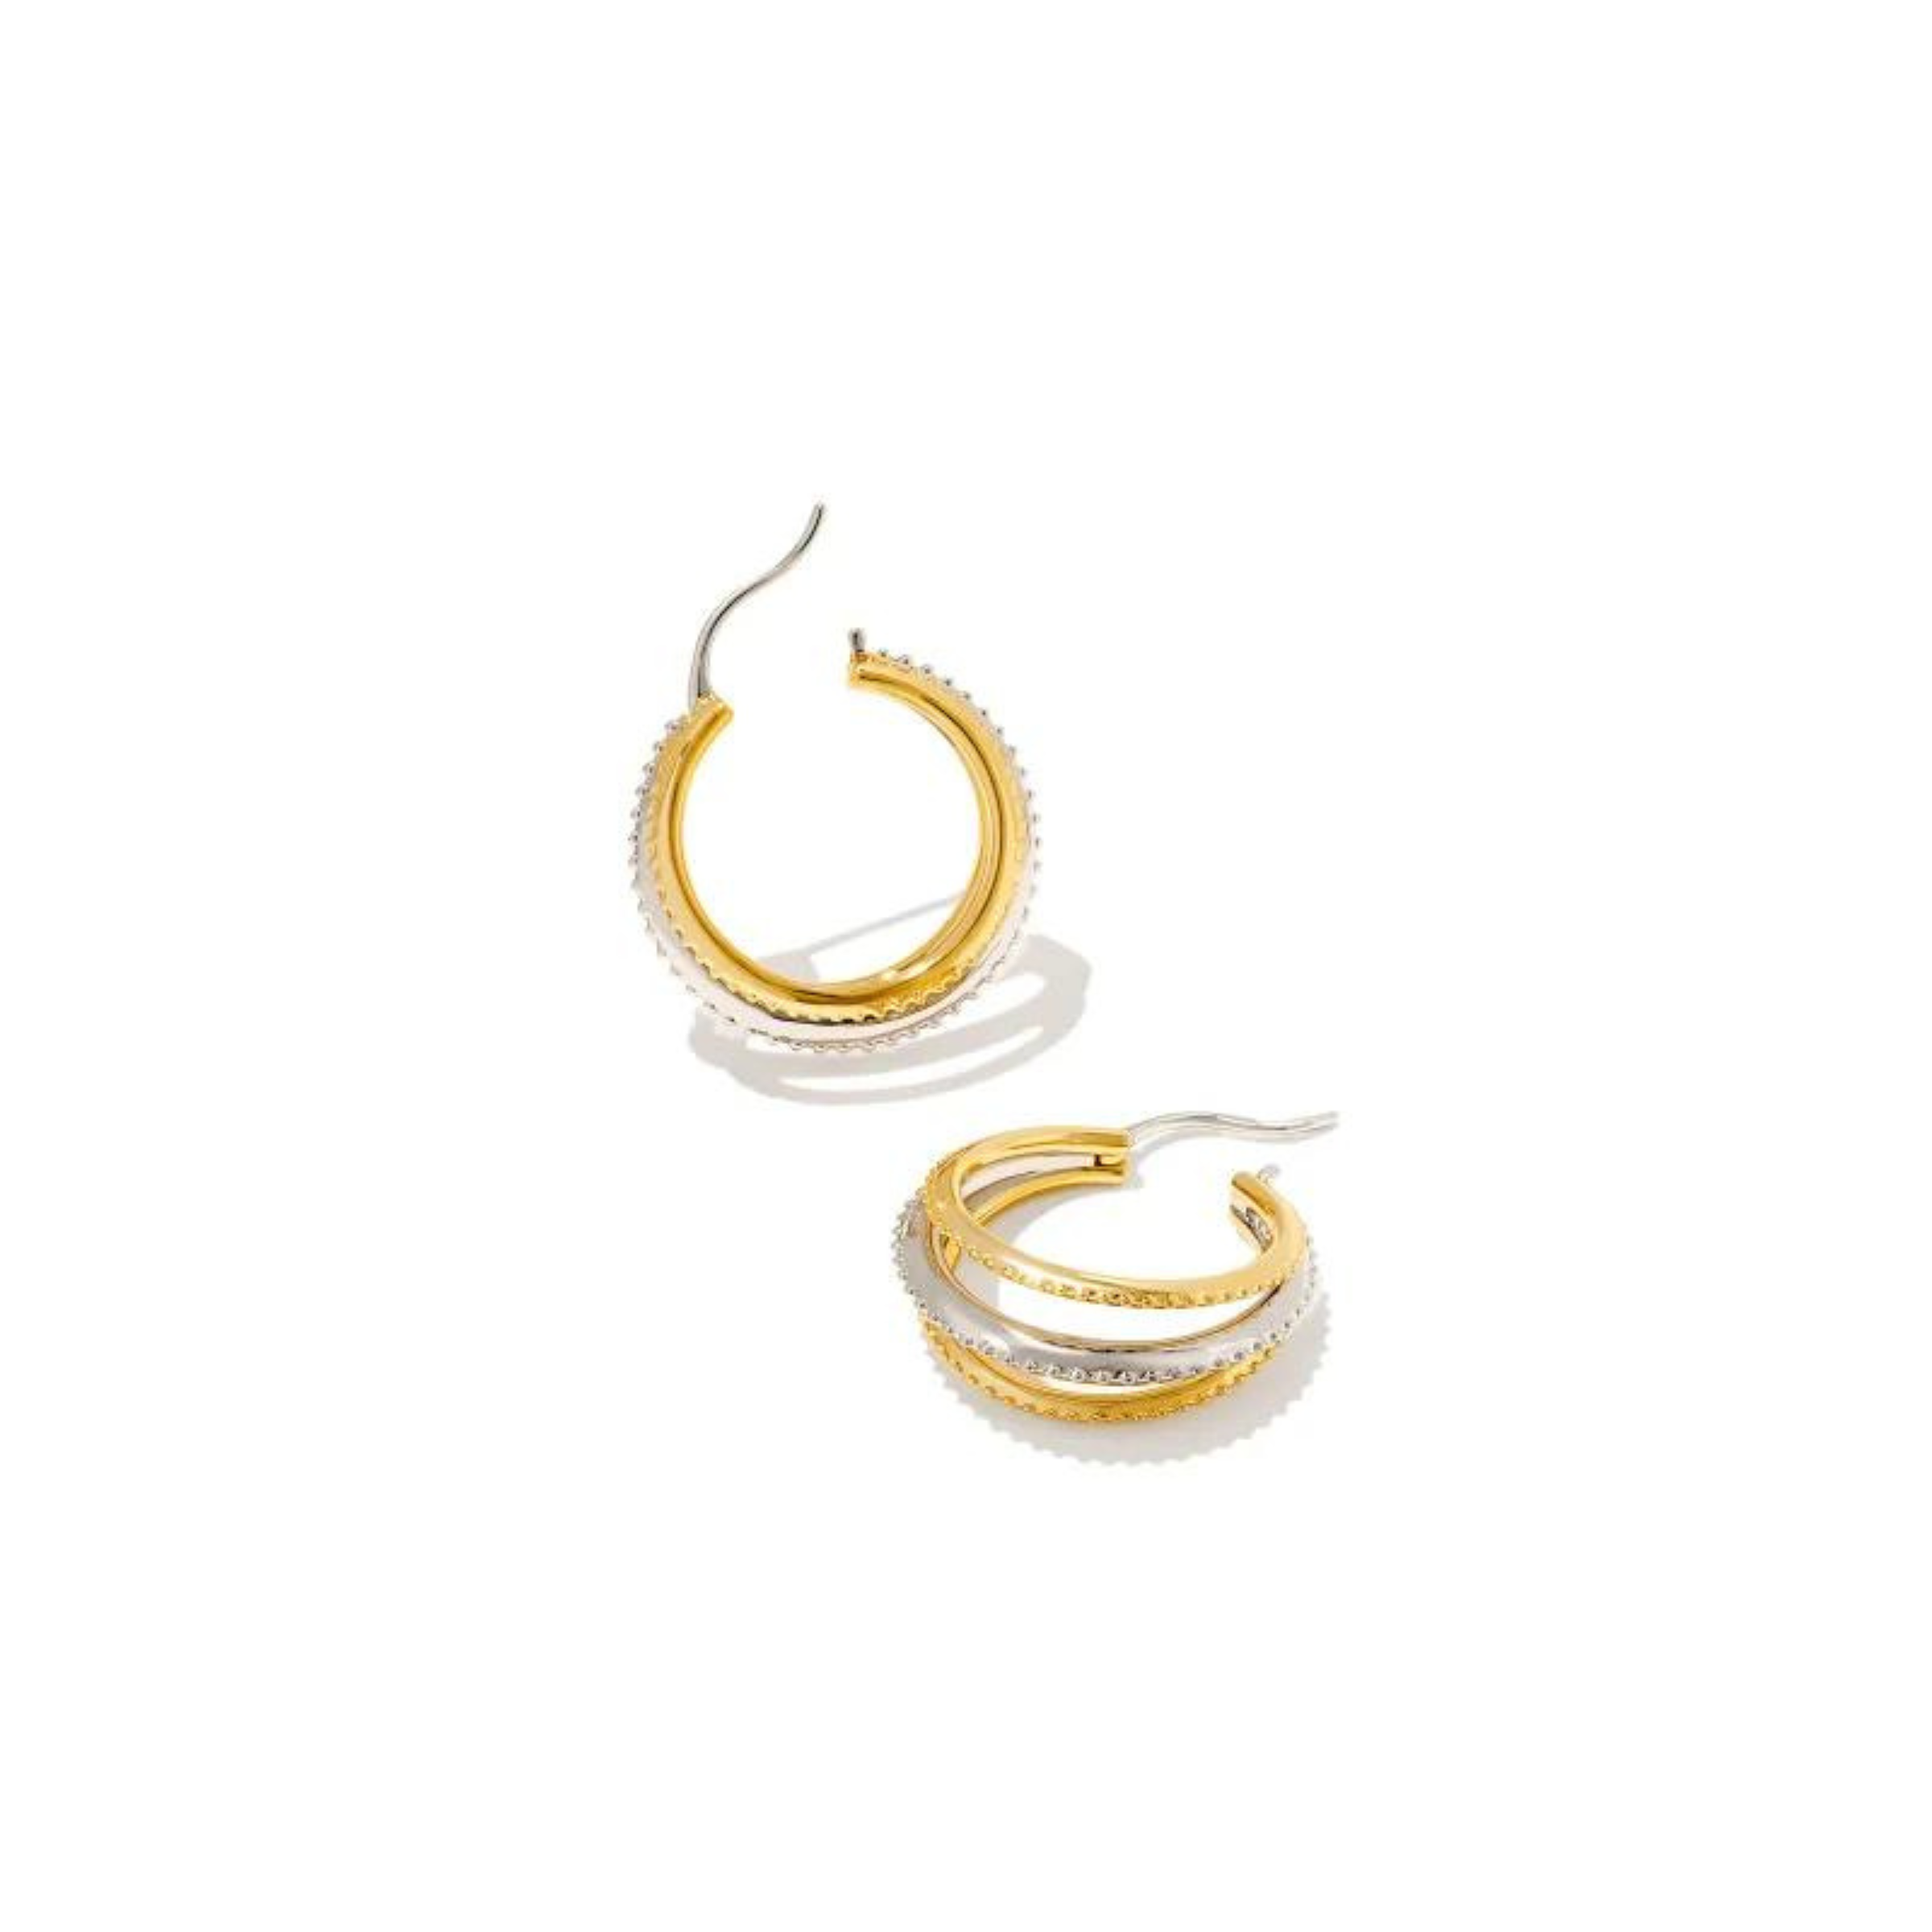 Kendra Scott | Dana Small Hoop Earrings in Mixed Metal - Giddy Up Glamour Boutique